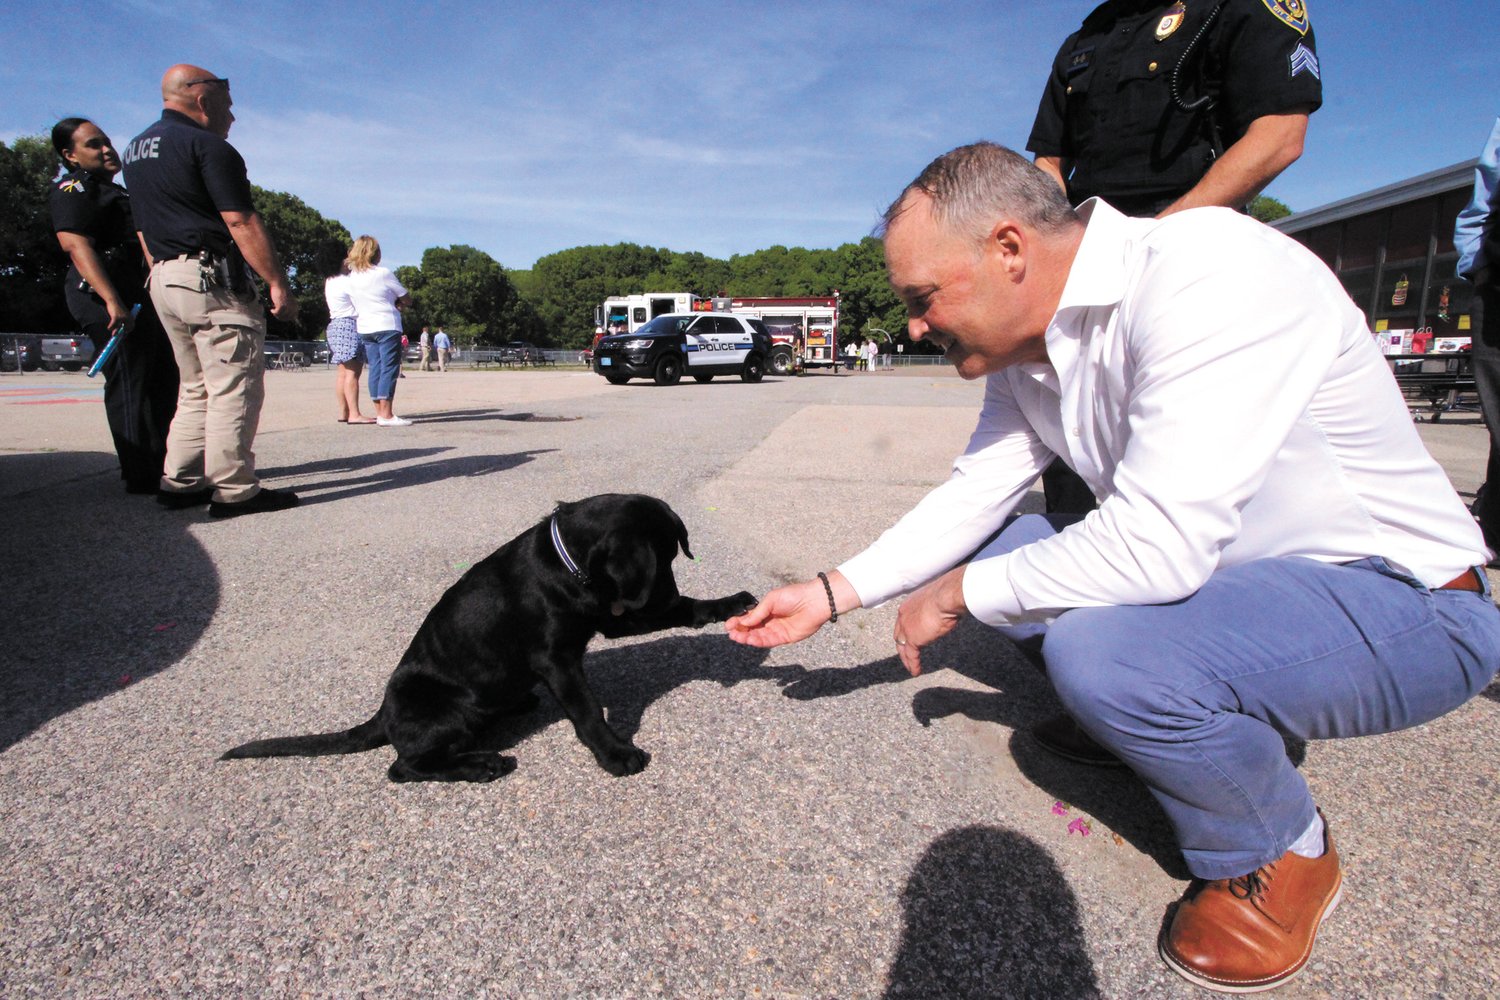 MEETING THE YOUNGEST DEAPRTMENT MEMBER: Dan Scanlon Jr, gets a paw shake from Charley, the newest Police Department recruit on May 25.